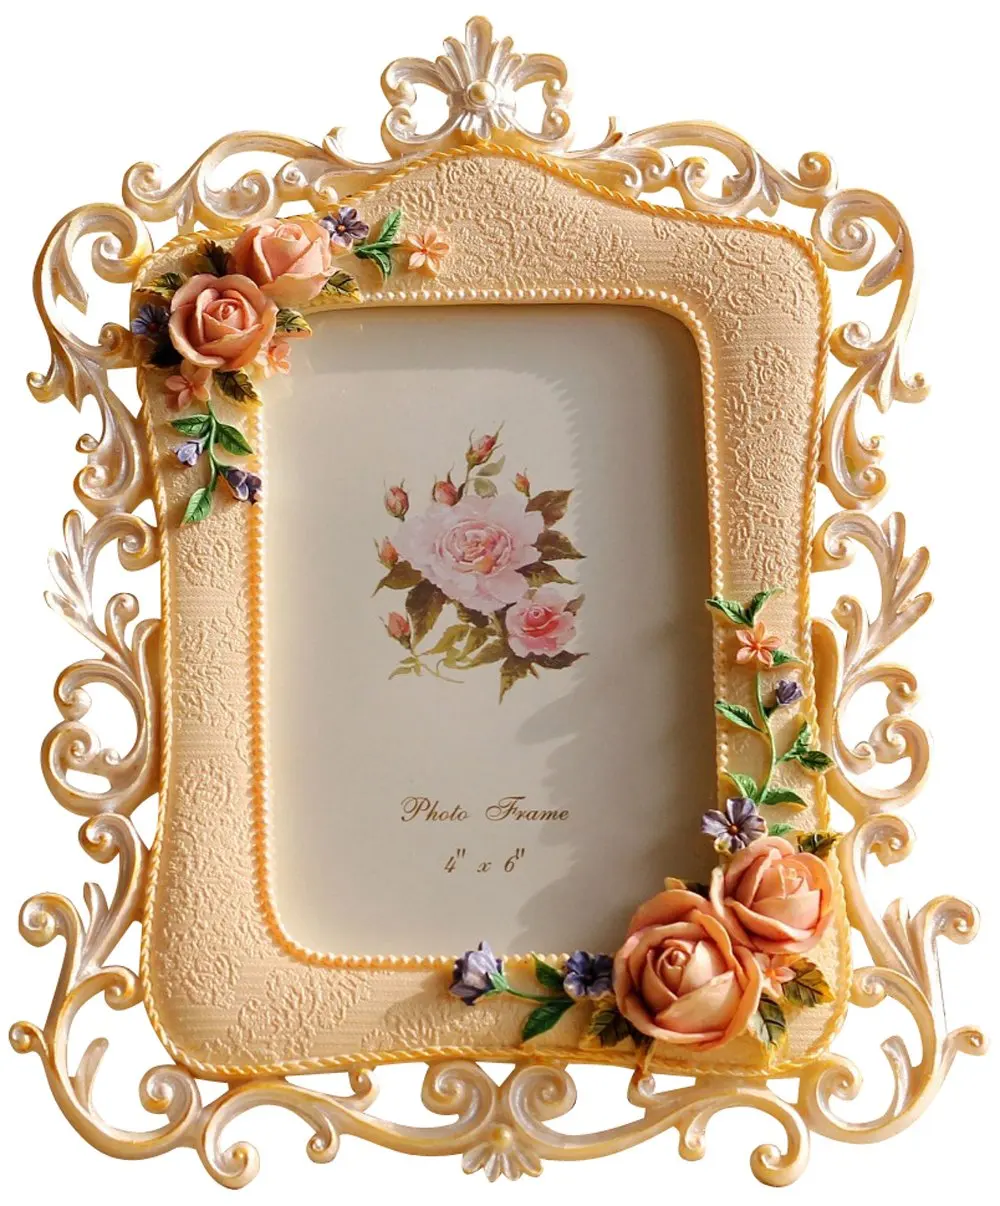 Buy Giftgarden Roses Frames 4 By 6 Photo For Best Friend Gift Wedding Gifts Valentines Gifts 4x6 Picture Frame Gift For Mother In Cheap Price On Alibaba Com